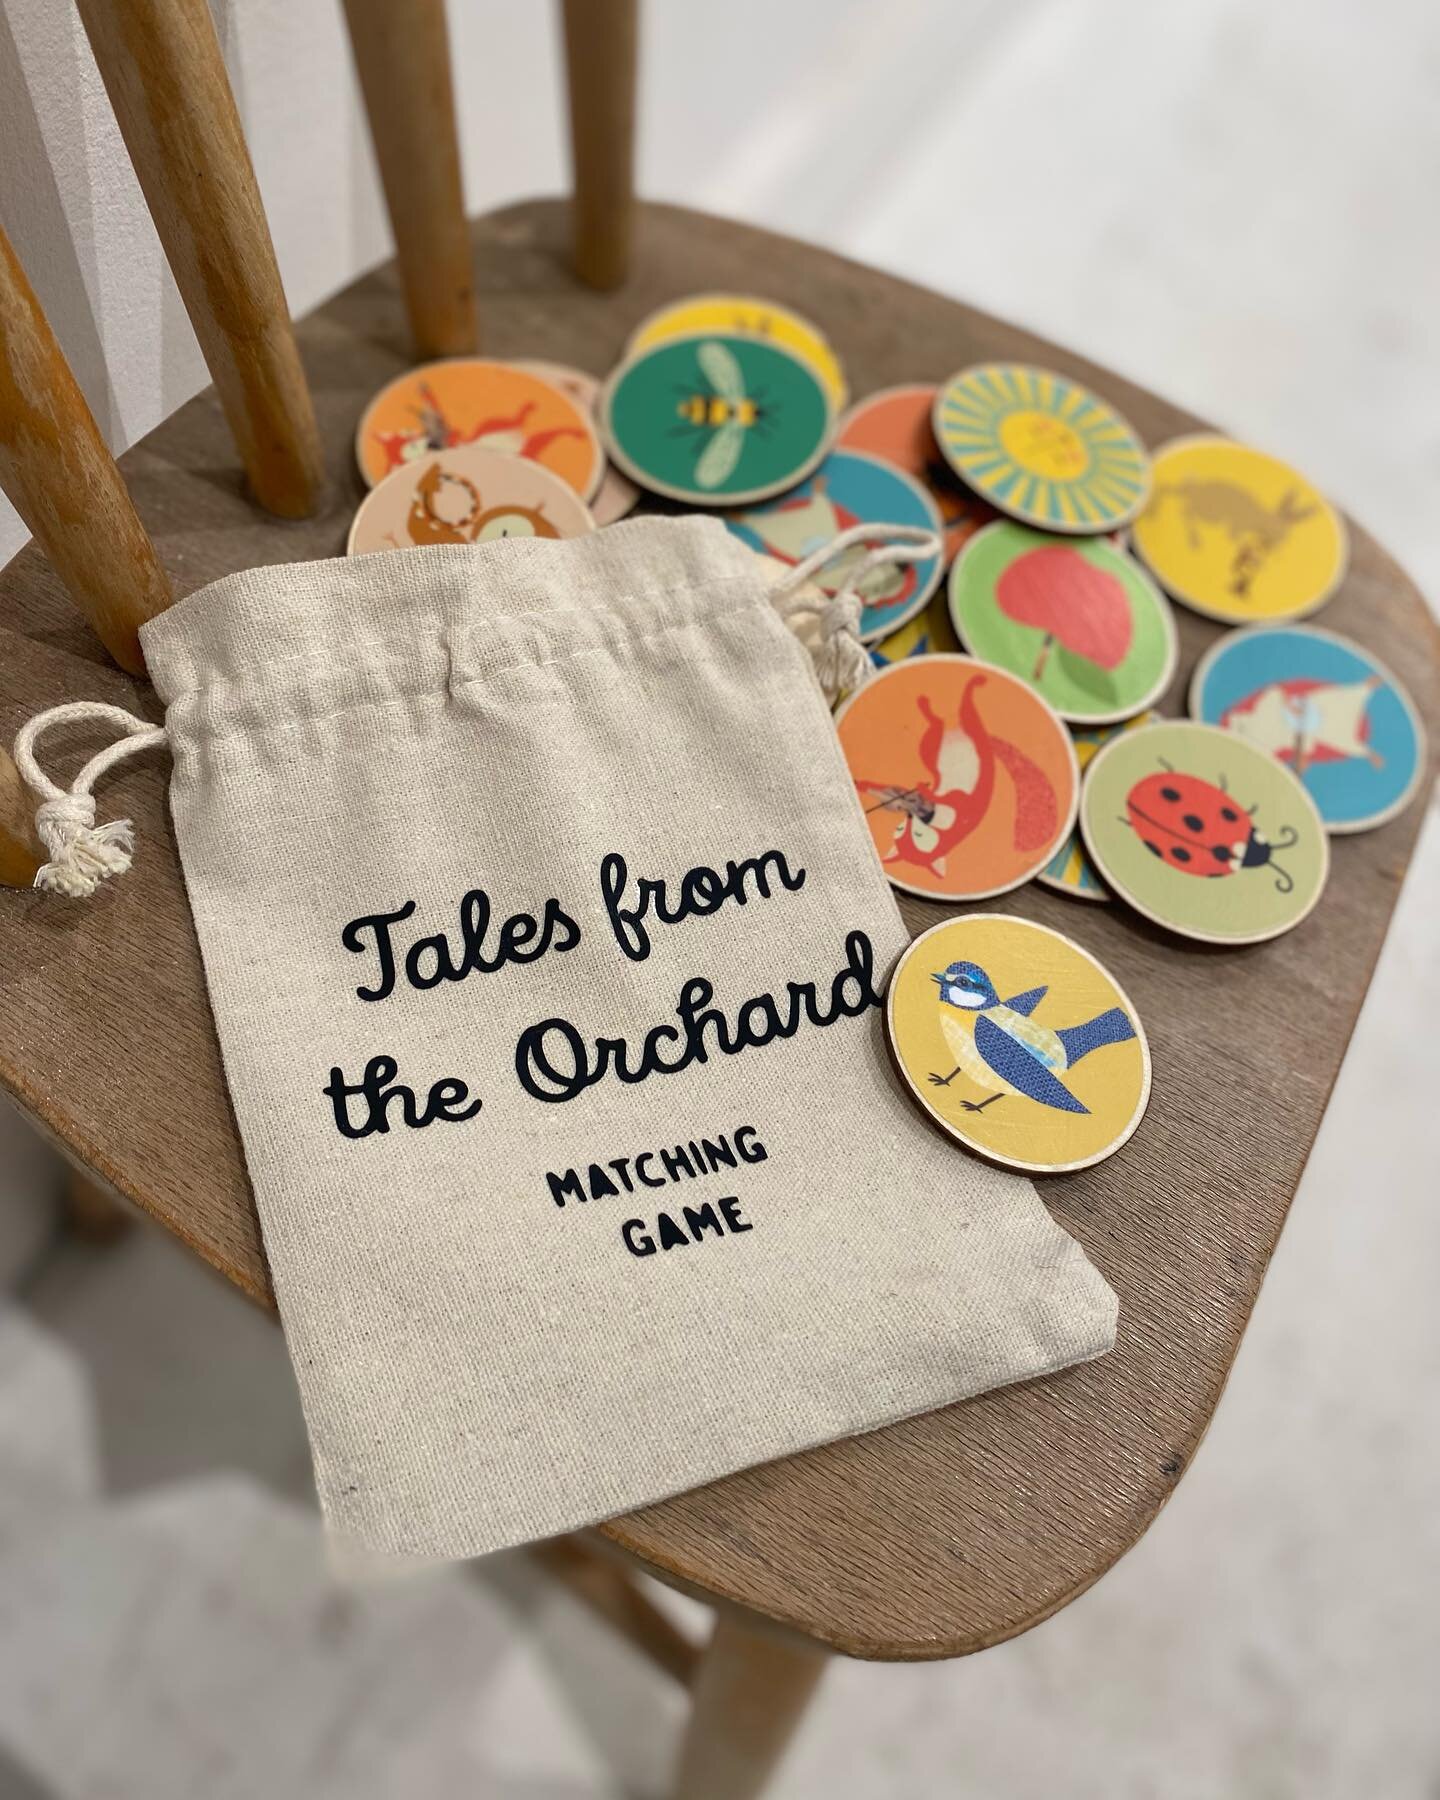 And here is a little orchard-inspired matching game for kiddos! Printed onto 20 wooden discs here in Somerset, hand lacquered and then popped into a little canvas bag - also printed by hand. I loved making these 😍. Huge thanks to my good friend Bos 